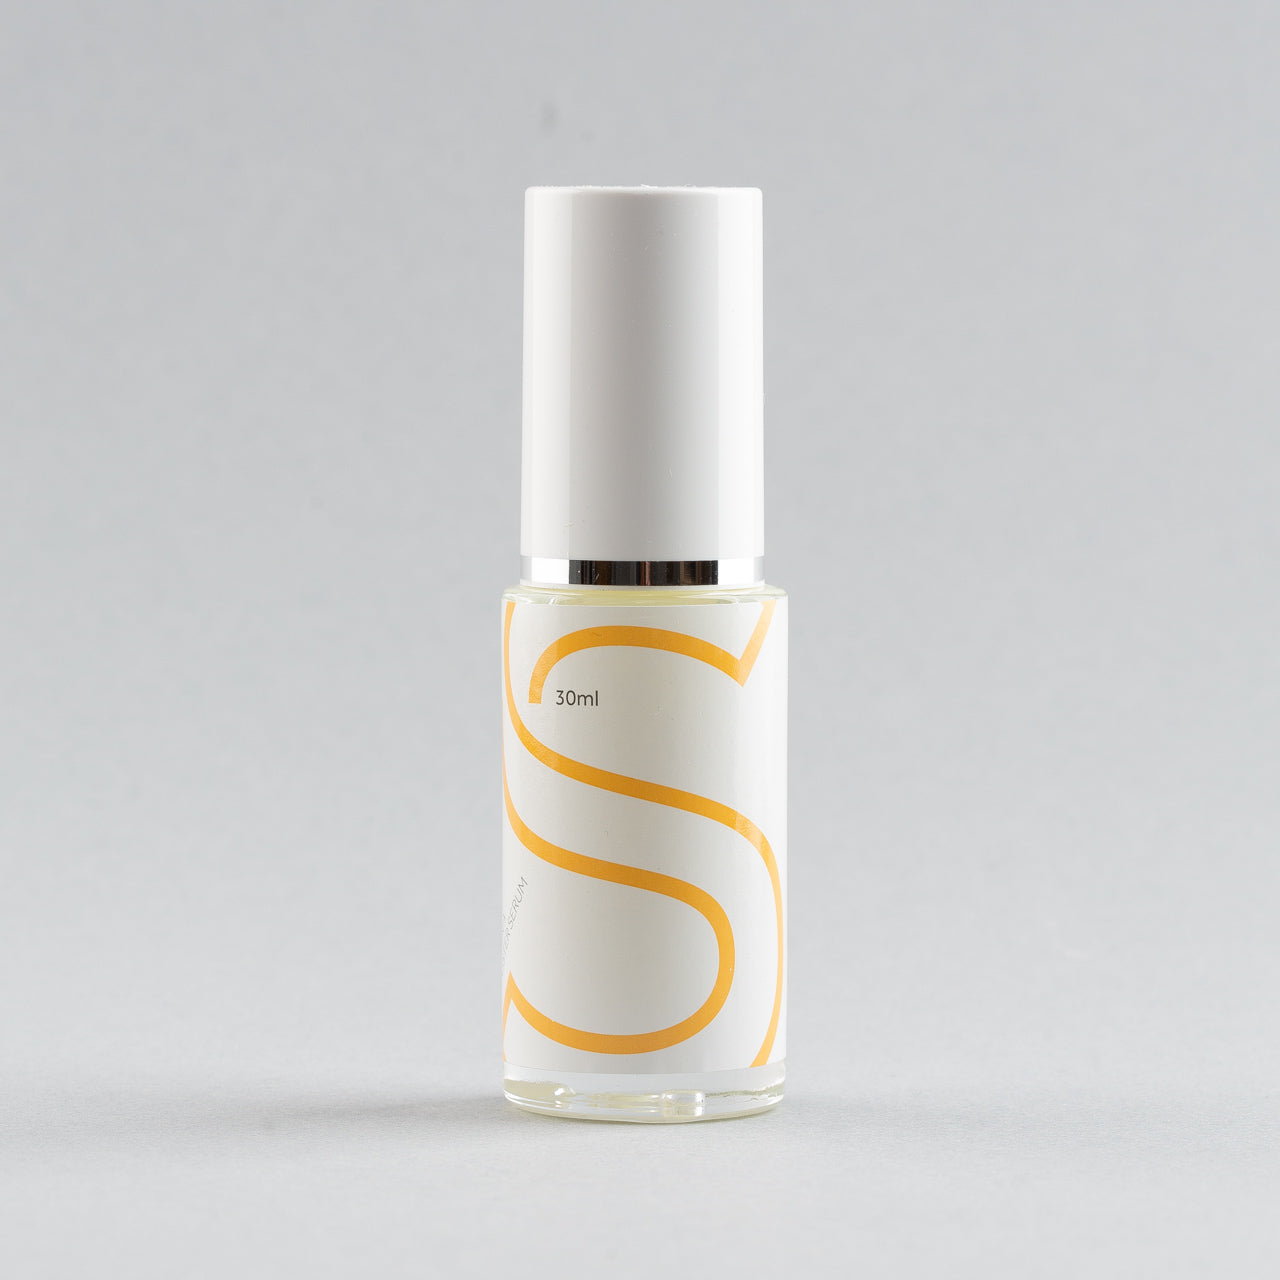 GFYS SERUM IN A WHITE BOTTLE WITH GFYS PACKAGING